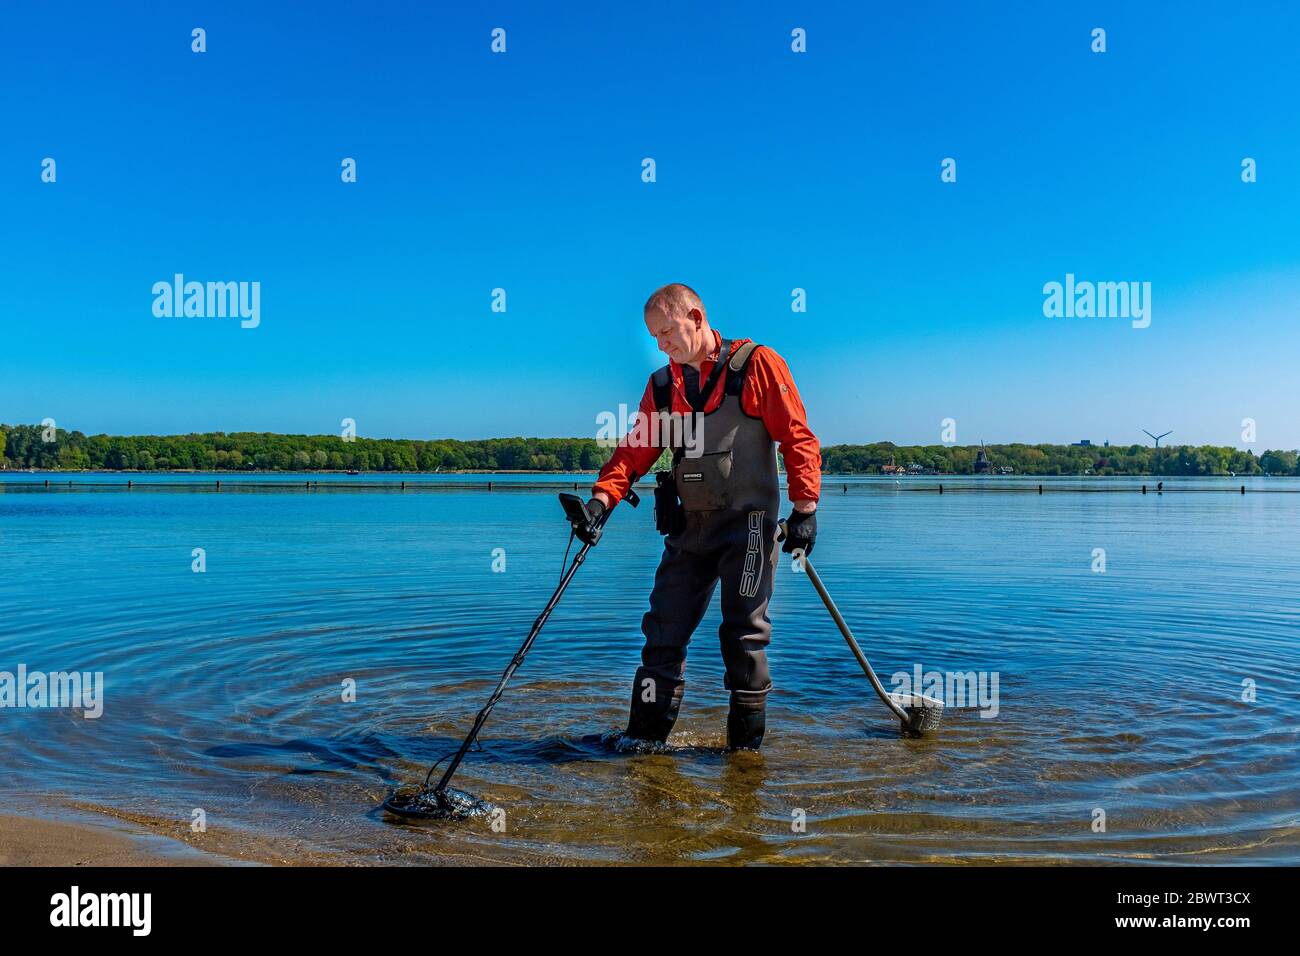 Rotterdam, Netherlands. Man seeking social distance during Corna Crisis by applying his hobby: searching a lake's bed for metals. Stock Photo